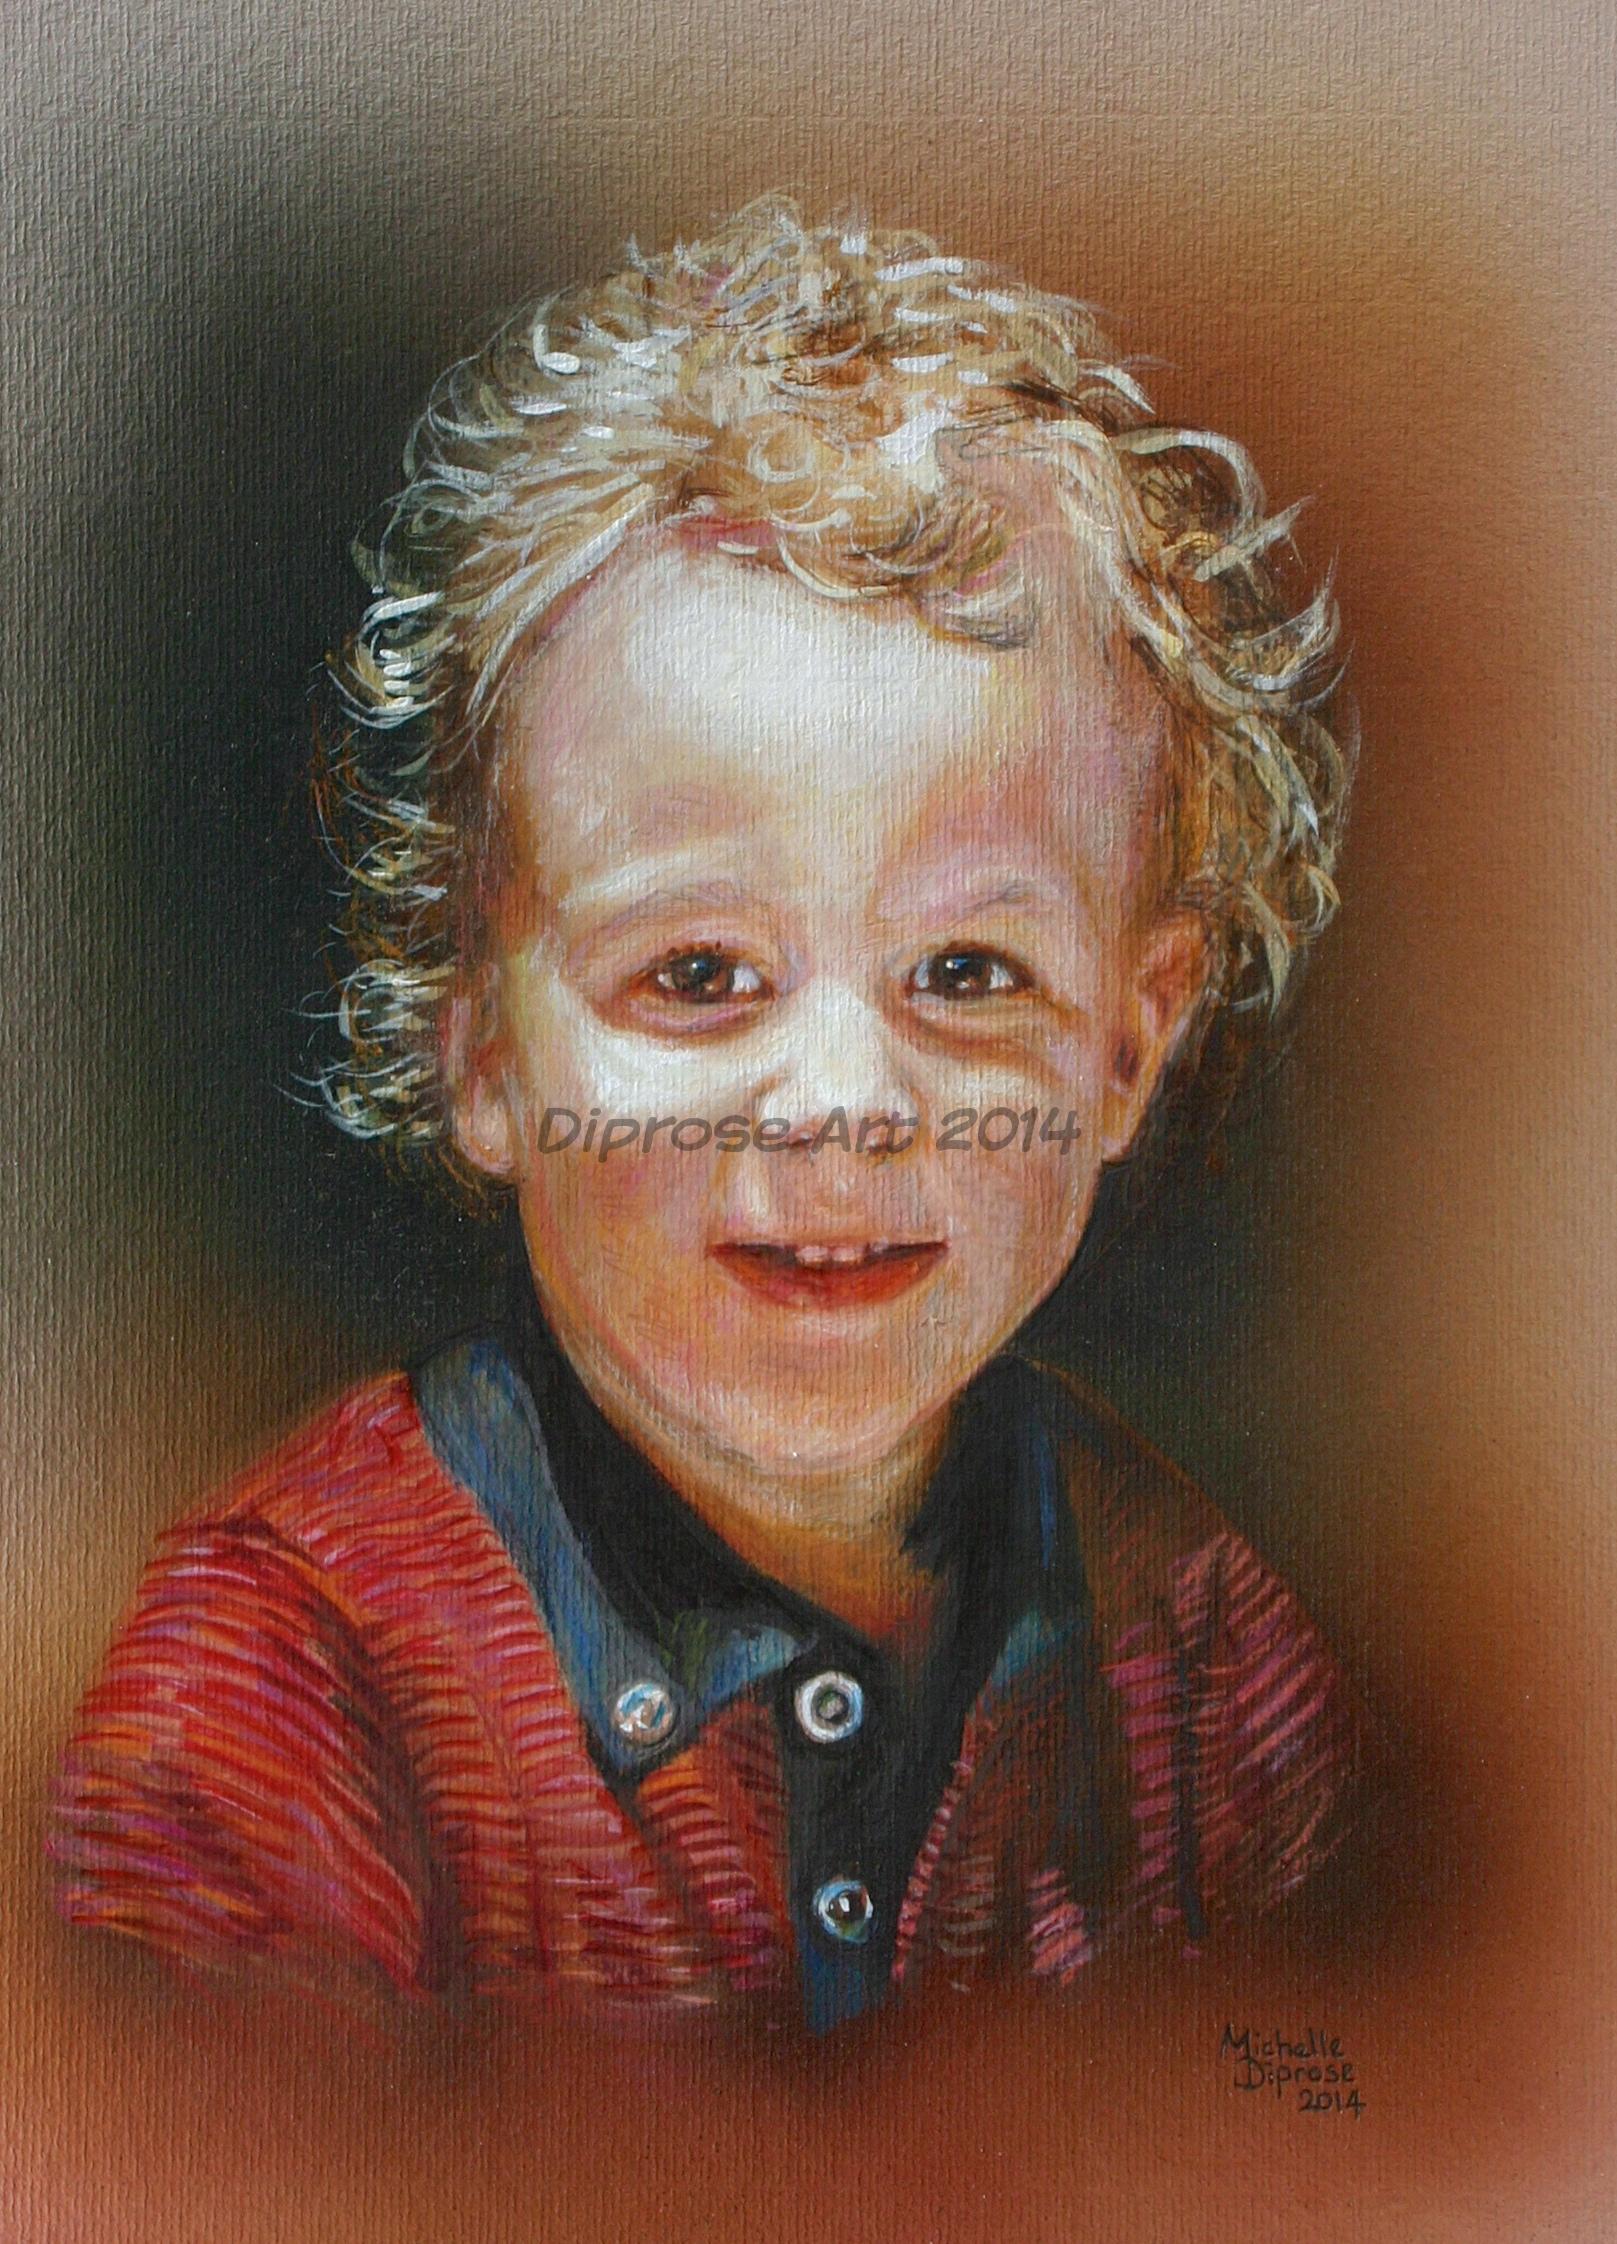 Acylics on board - approx A3 - people portraits - I did this as a wedding gift for my very good friends - this is their little son when he was about 4 years old.  I think I surprised them - they thought I only painted dogs!